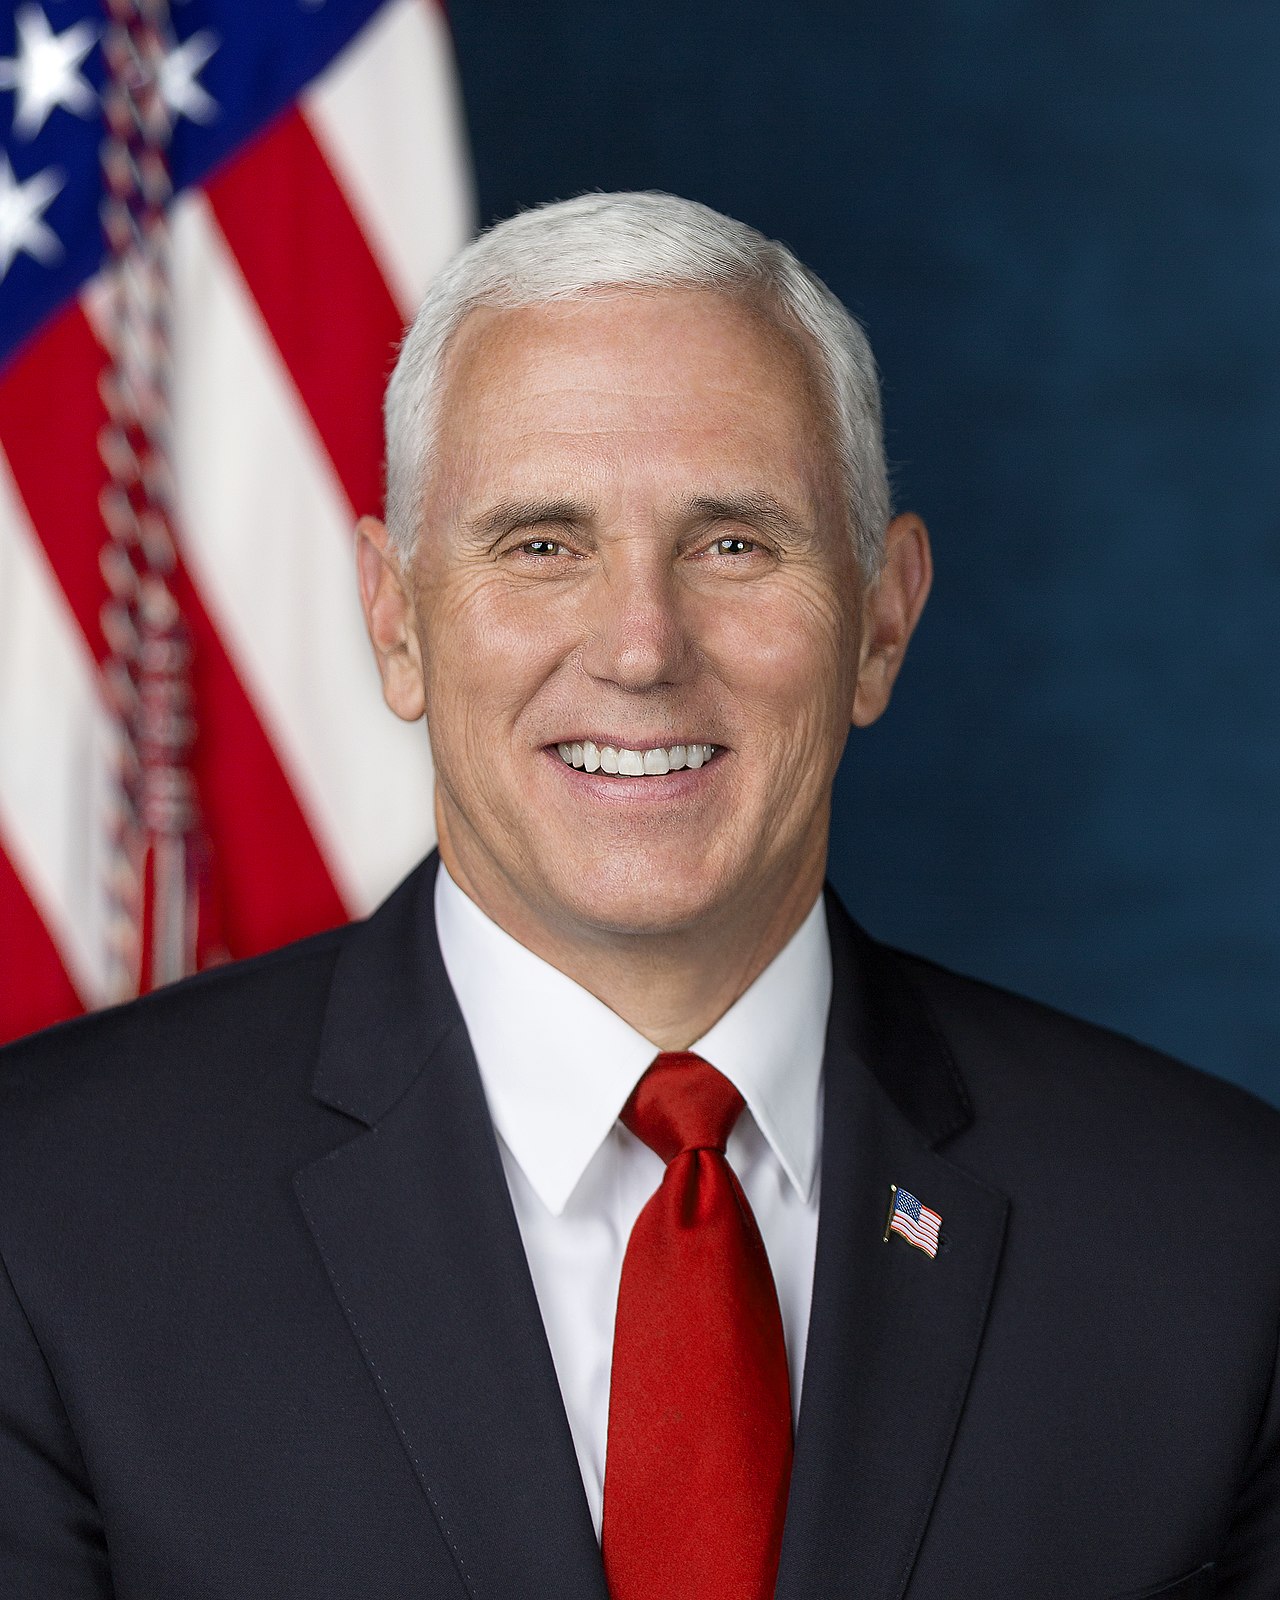 Mike Pence official Vice Presidential portrait.jpg